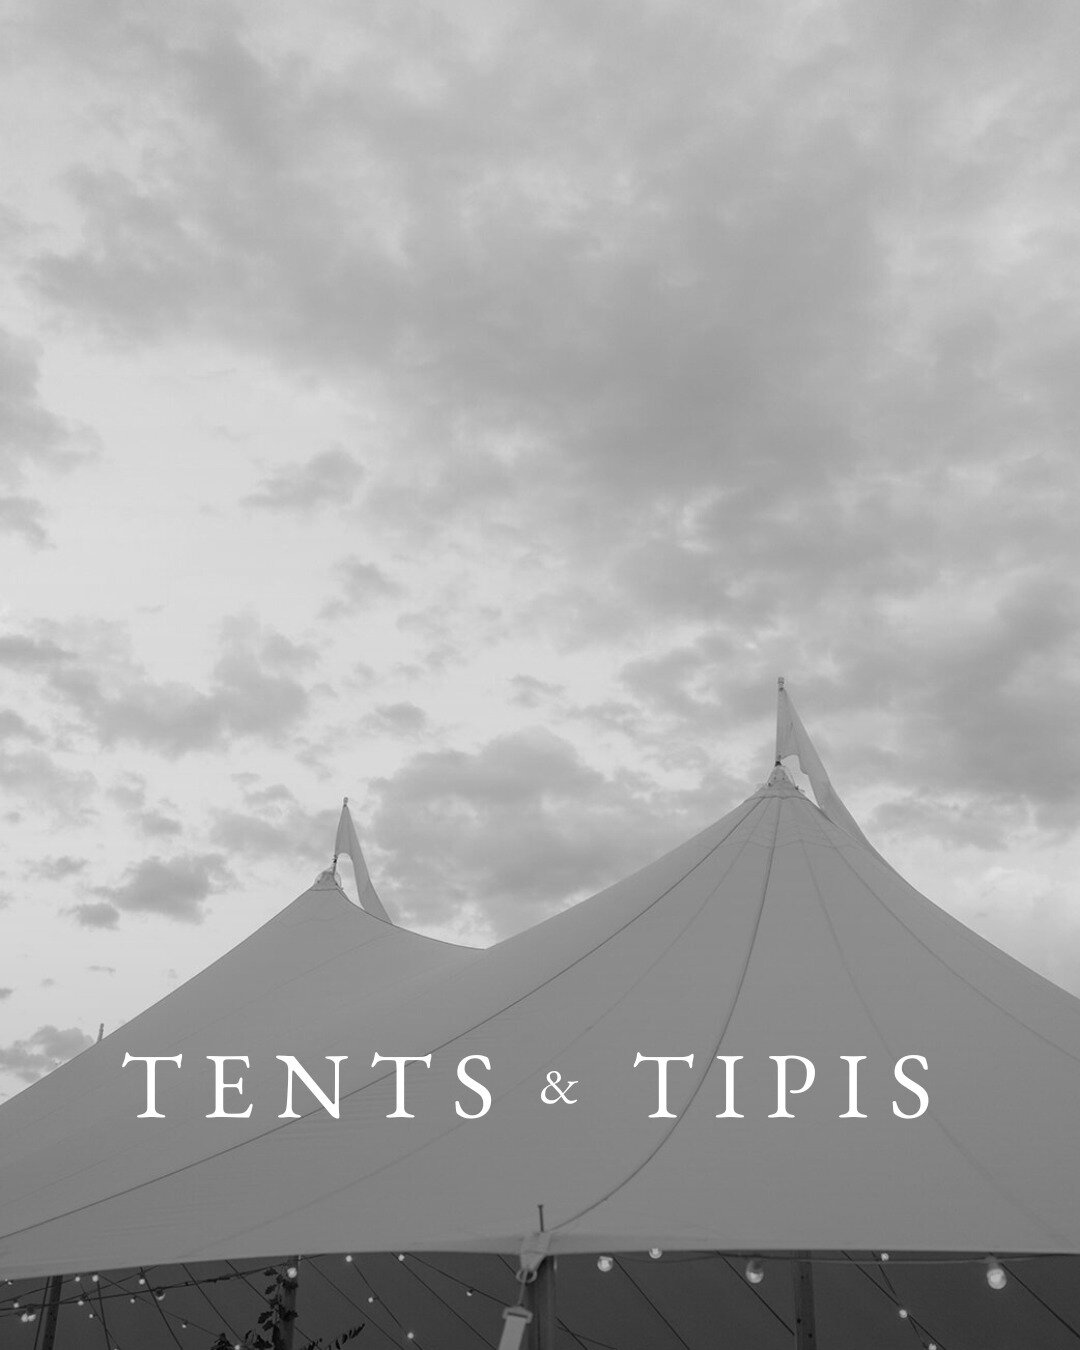 // Sperry Tents &amp; Kata Tipis //
ㅤ
There&rsquo;s something so unique about having the wind in your hair or the fresh signature smell of WA&rsquo;s native trees. There&rsquo;s no denying that being outdoors, whether it&rsquo;s raining or the sun is